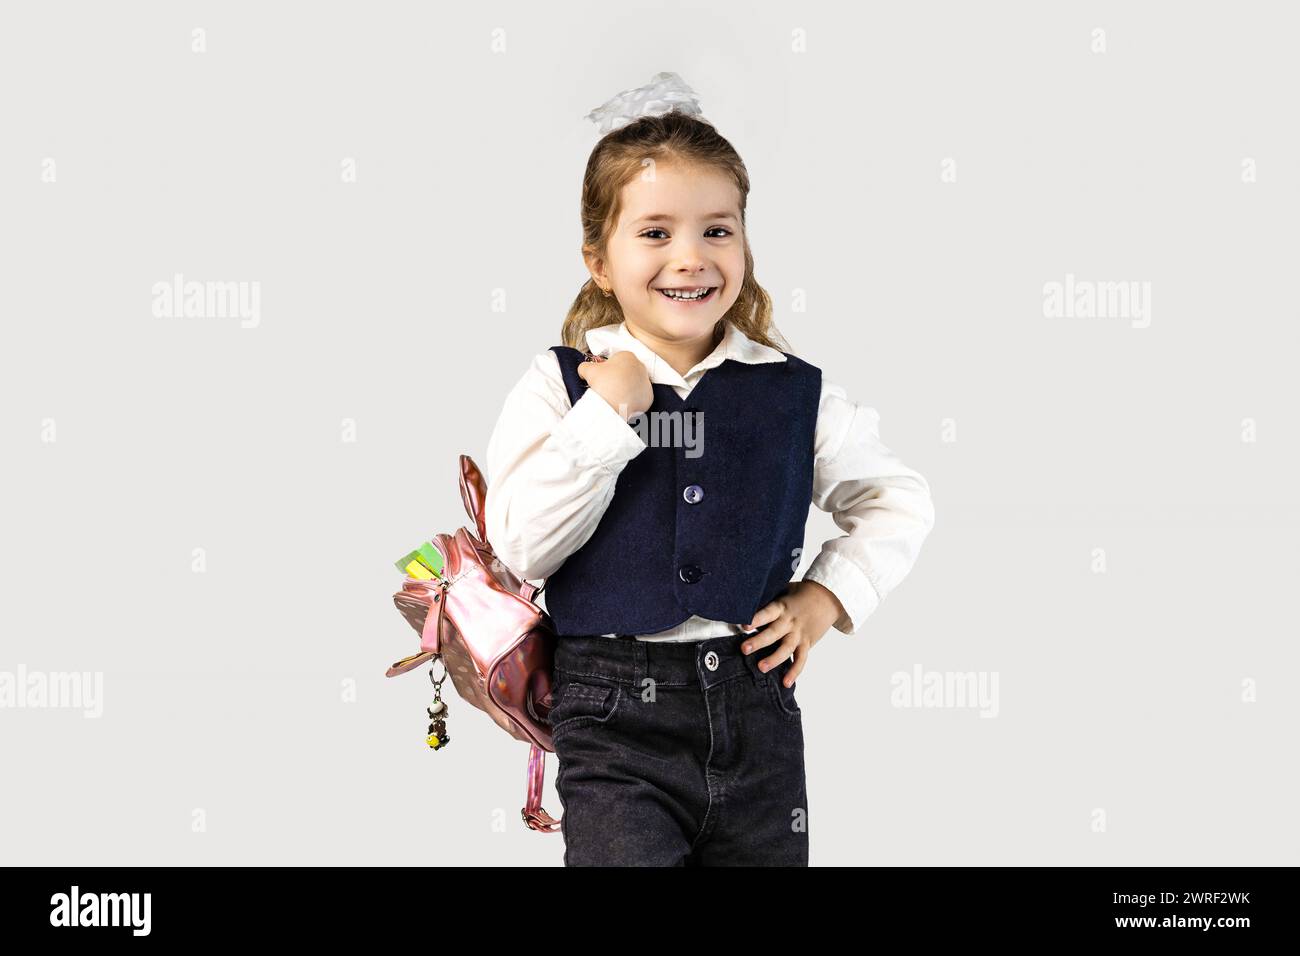 The little girl, with a smile on her face, is wearing a school uniform with puffed sleeves and carrying a backpack. She looks happy and her thumbs are Stock Photo